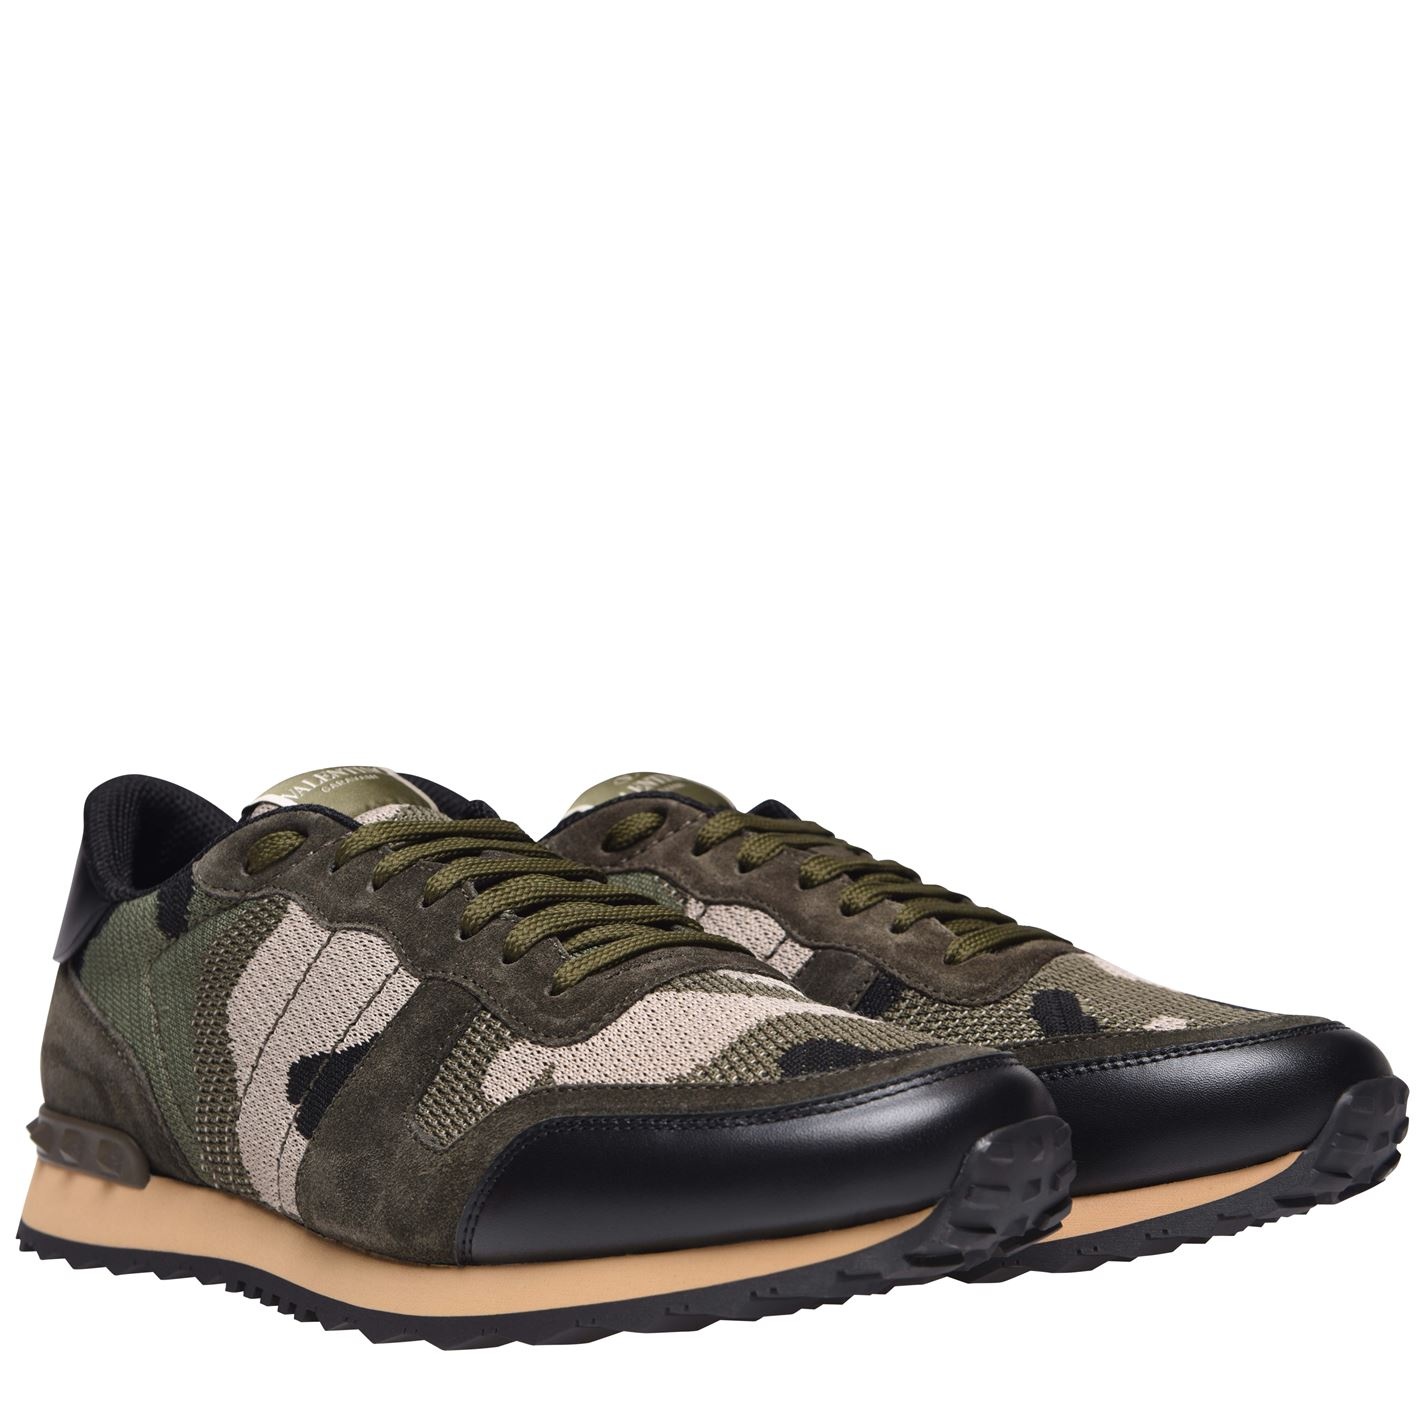 MESH CAMOUFLAGE ROCKRUNNER TRAINERS - 3